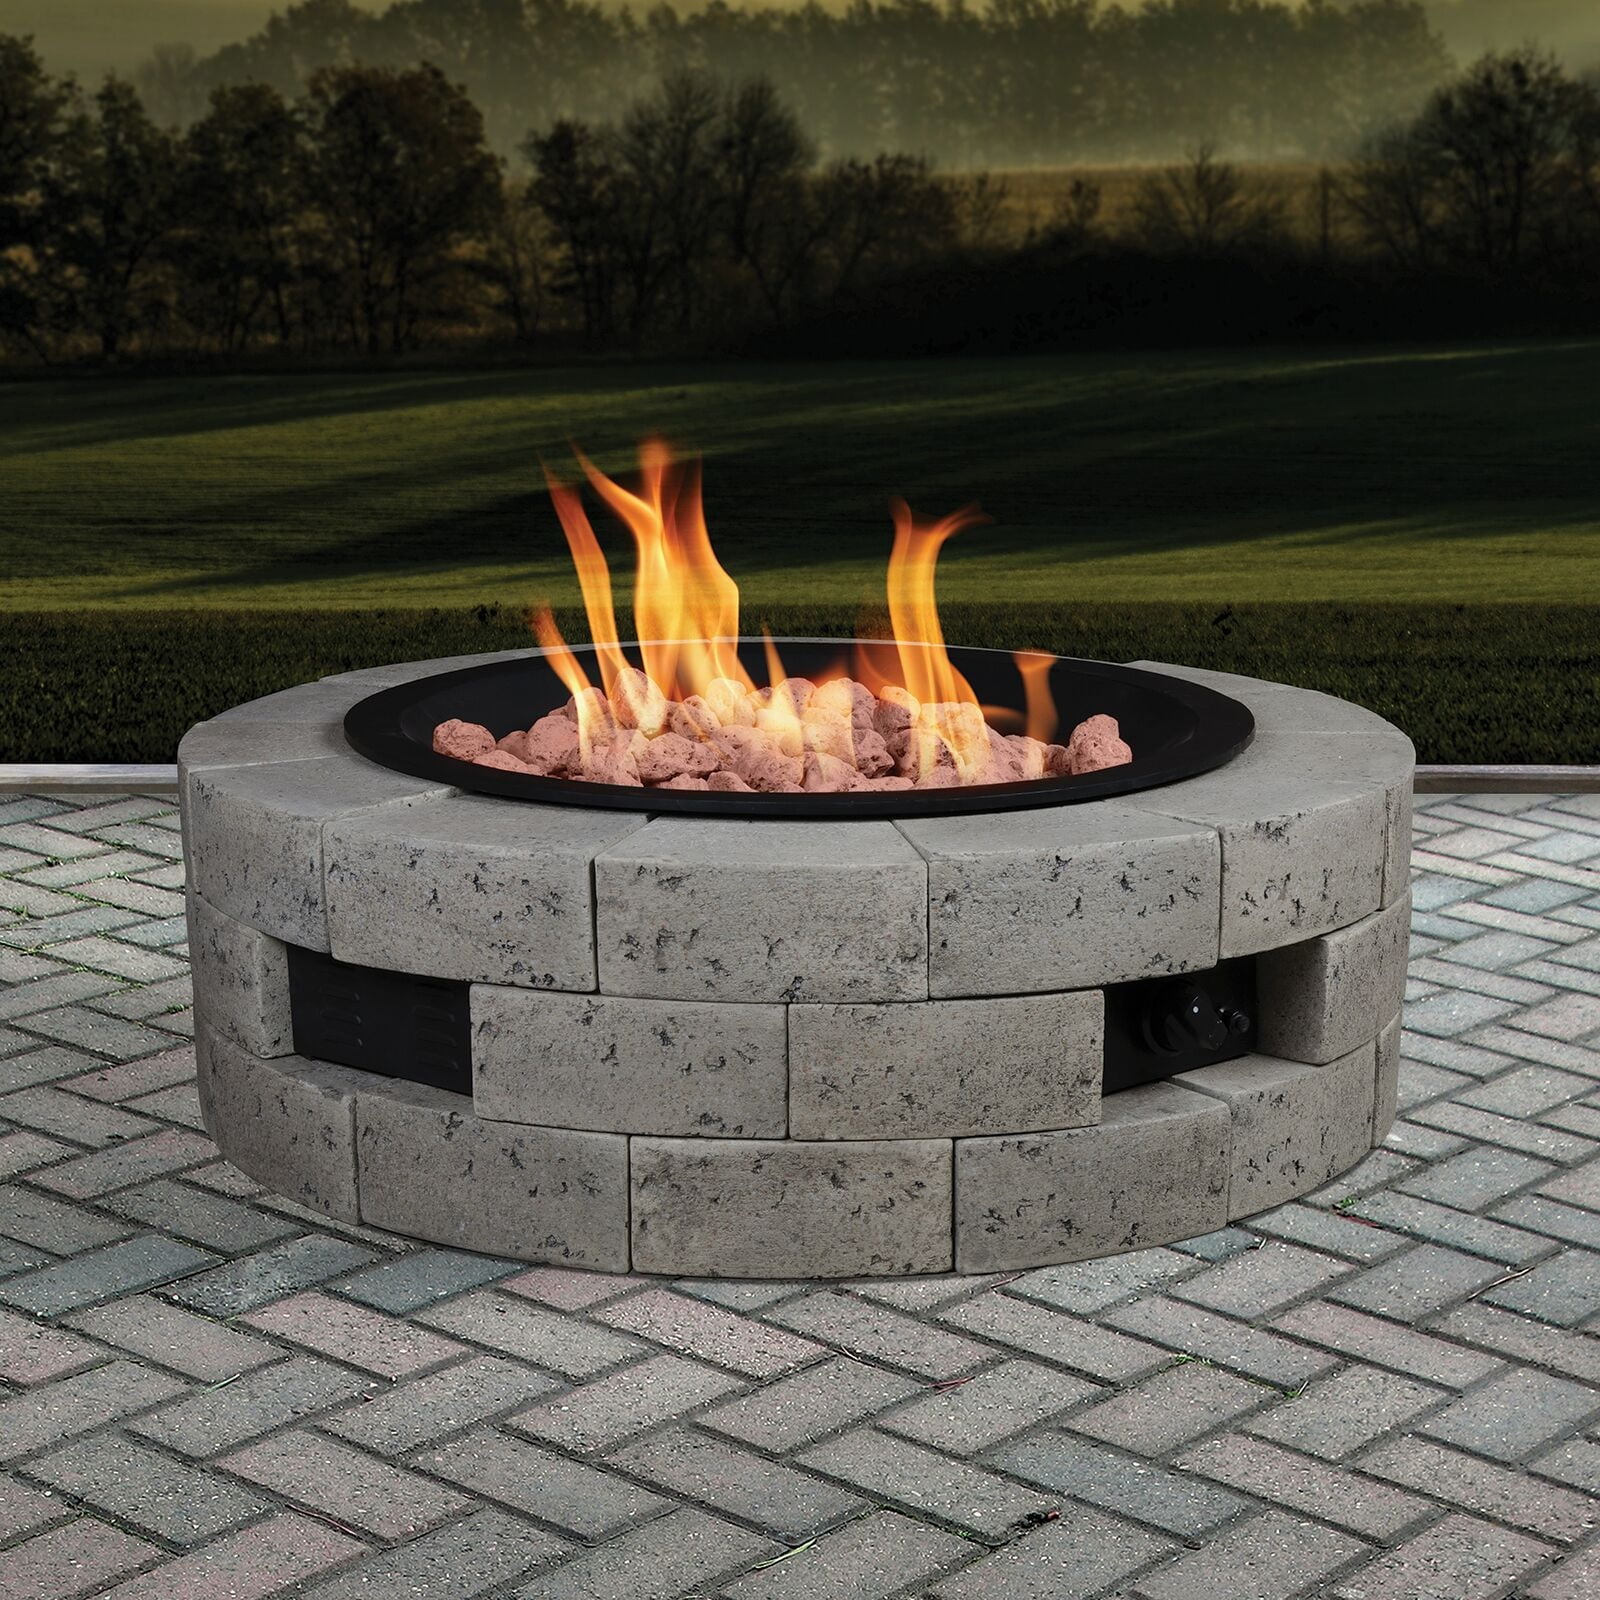 Decorative Round Gas Smokeless Fire Pit, Sears Gas Fire Pit